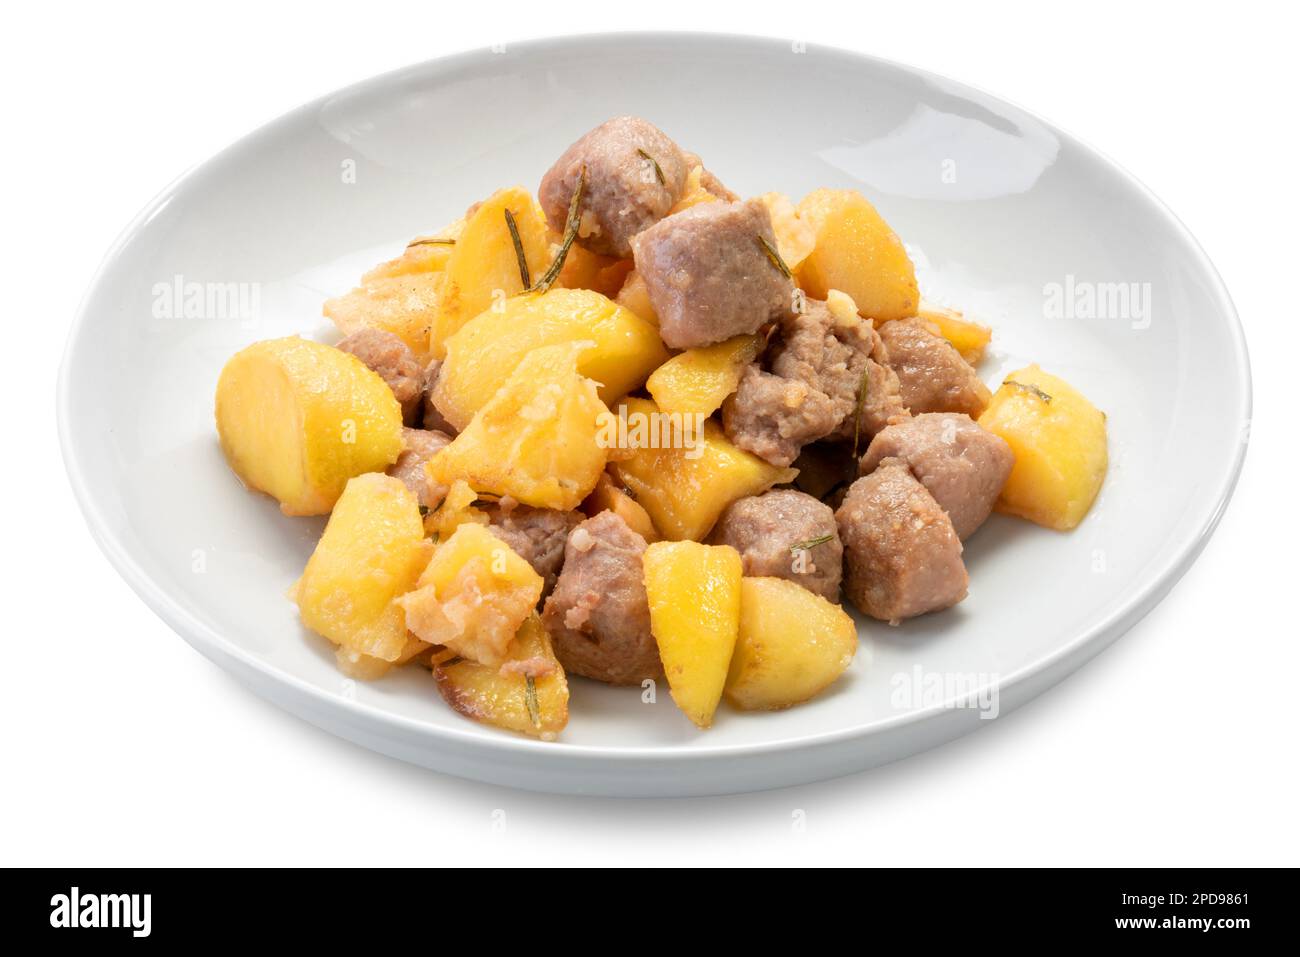 Meat stew with baked potatoes in white dish isolated on white with clipping path included Stock Photo